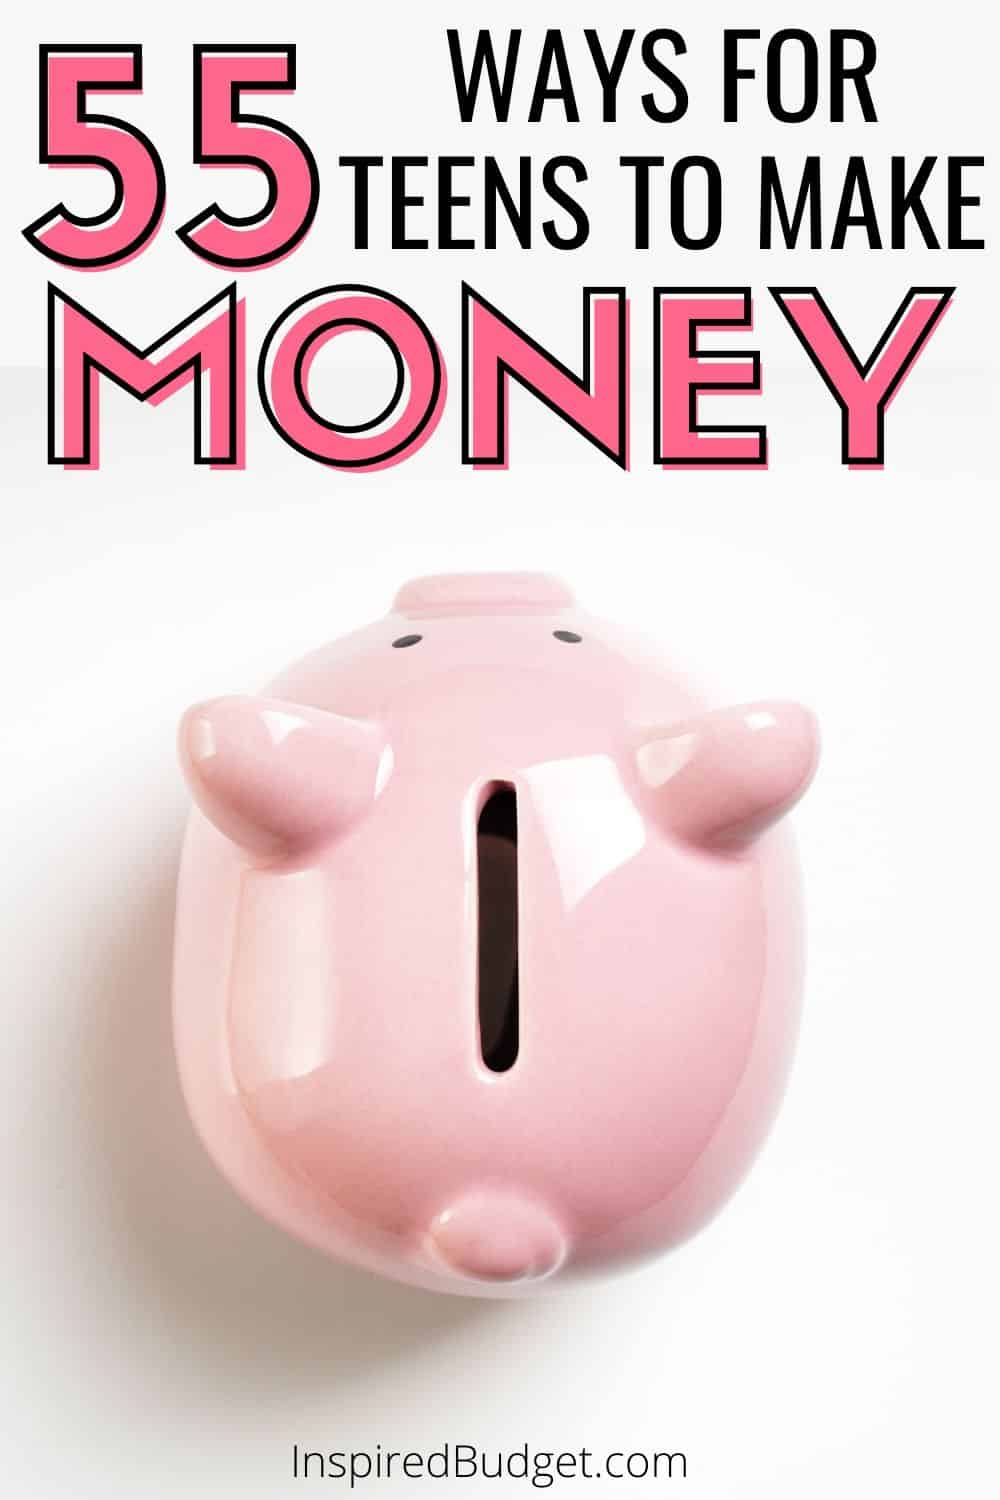 Need ideas for your teen to make money? Check out this complete list of 55 ways that any teenager can earn money!